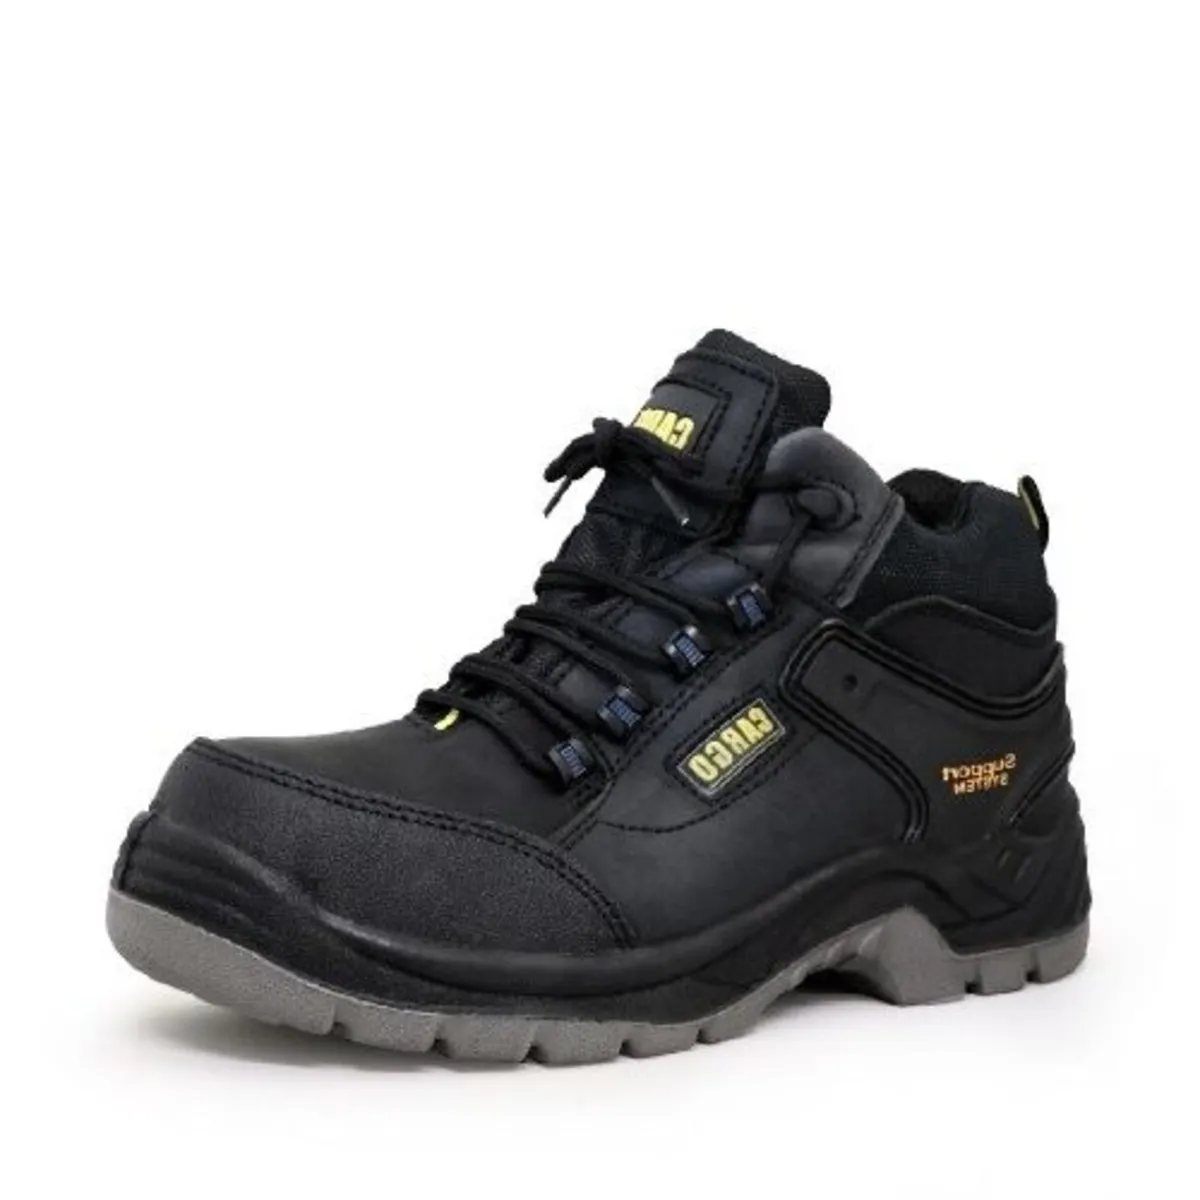 Safety Boots - Image 1